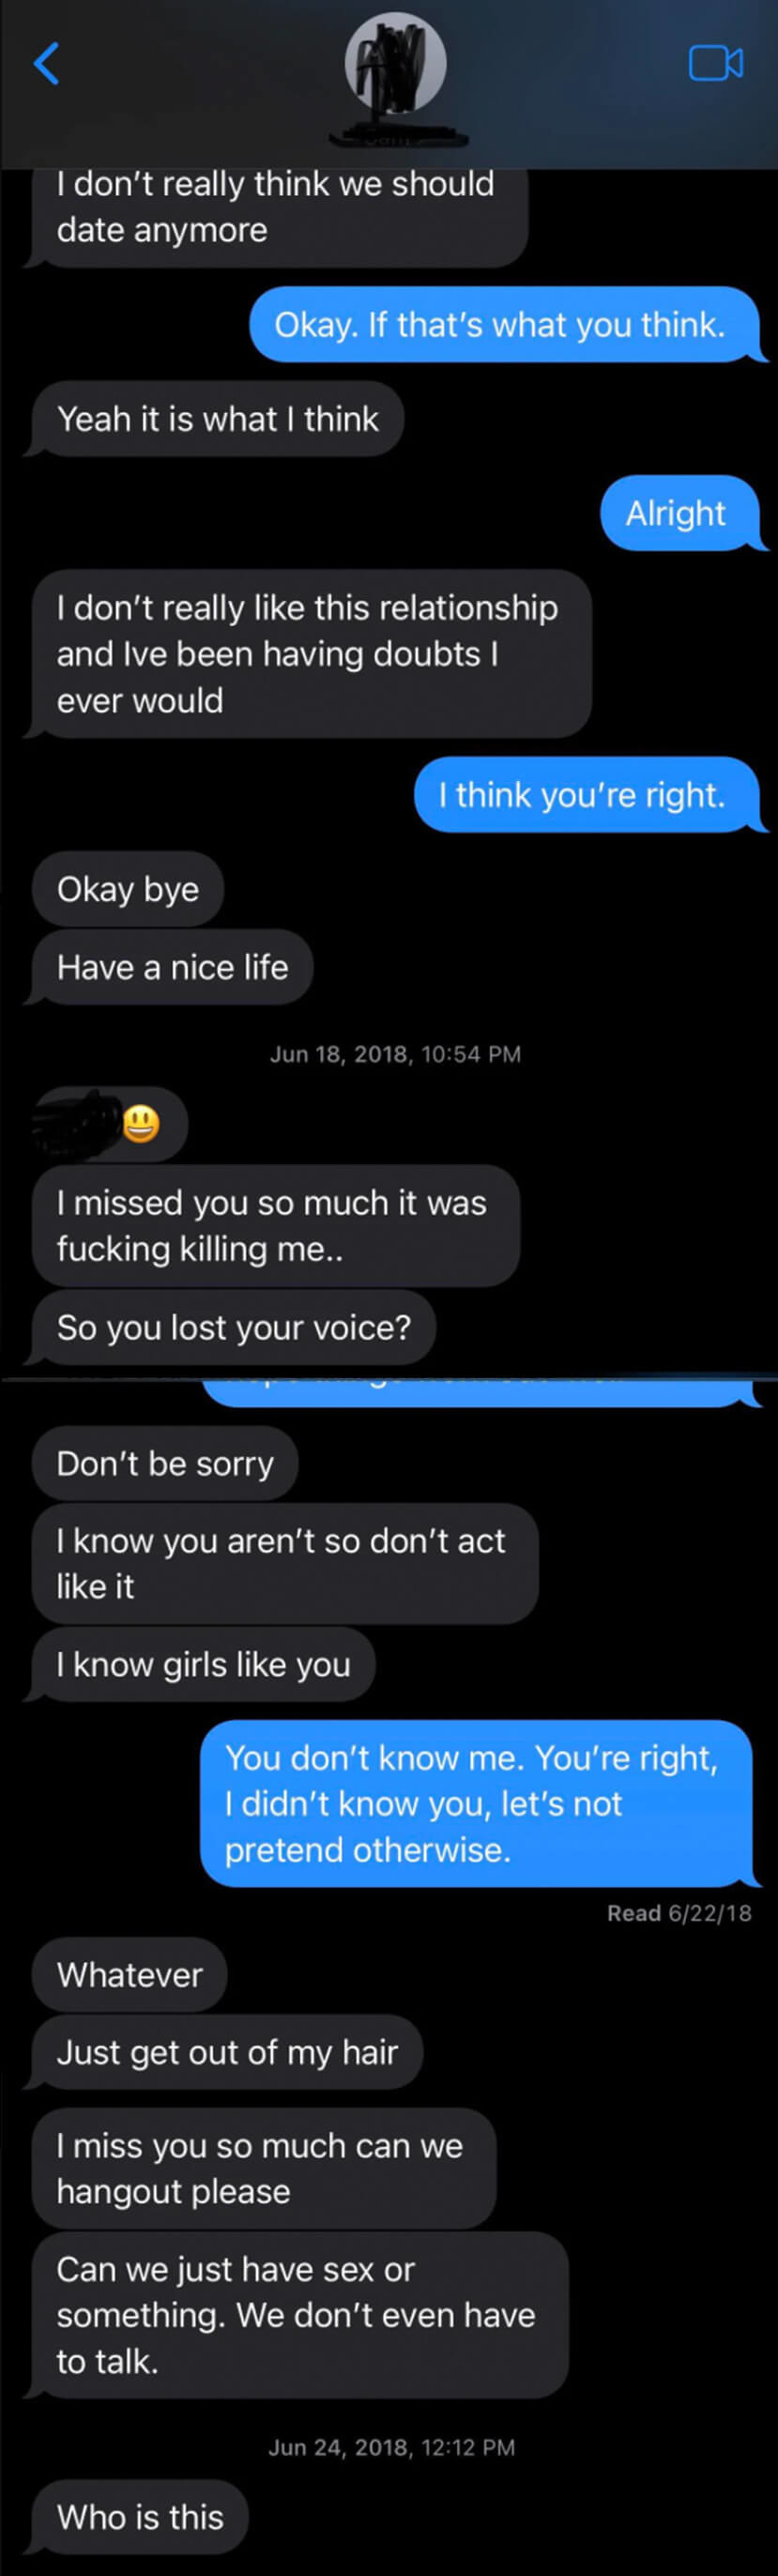 man breaks up with woman and then keeps messaging her, saying &quot;get out of my hair&quot; then switching and asking for sex, saying they don&#x27;t even have to talk, before finishing by saying &quot;who is this?&quot;